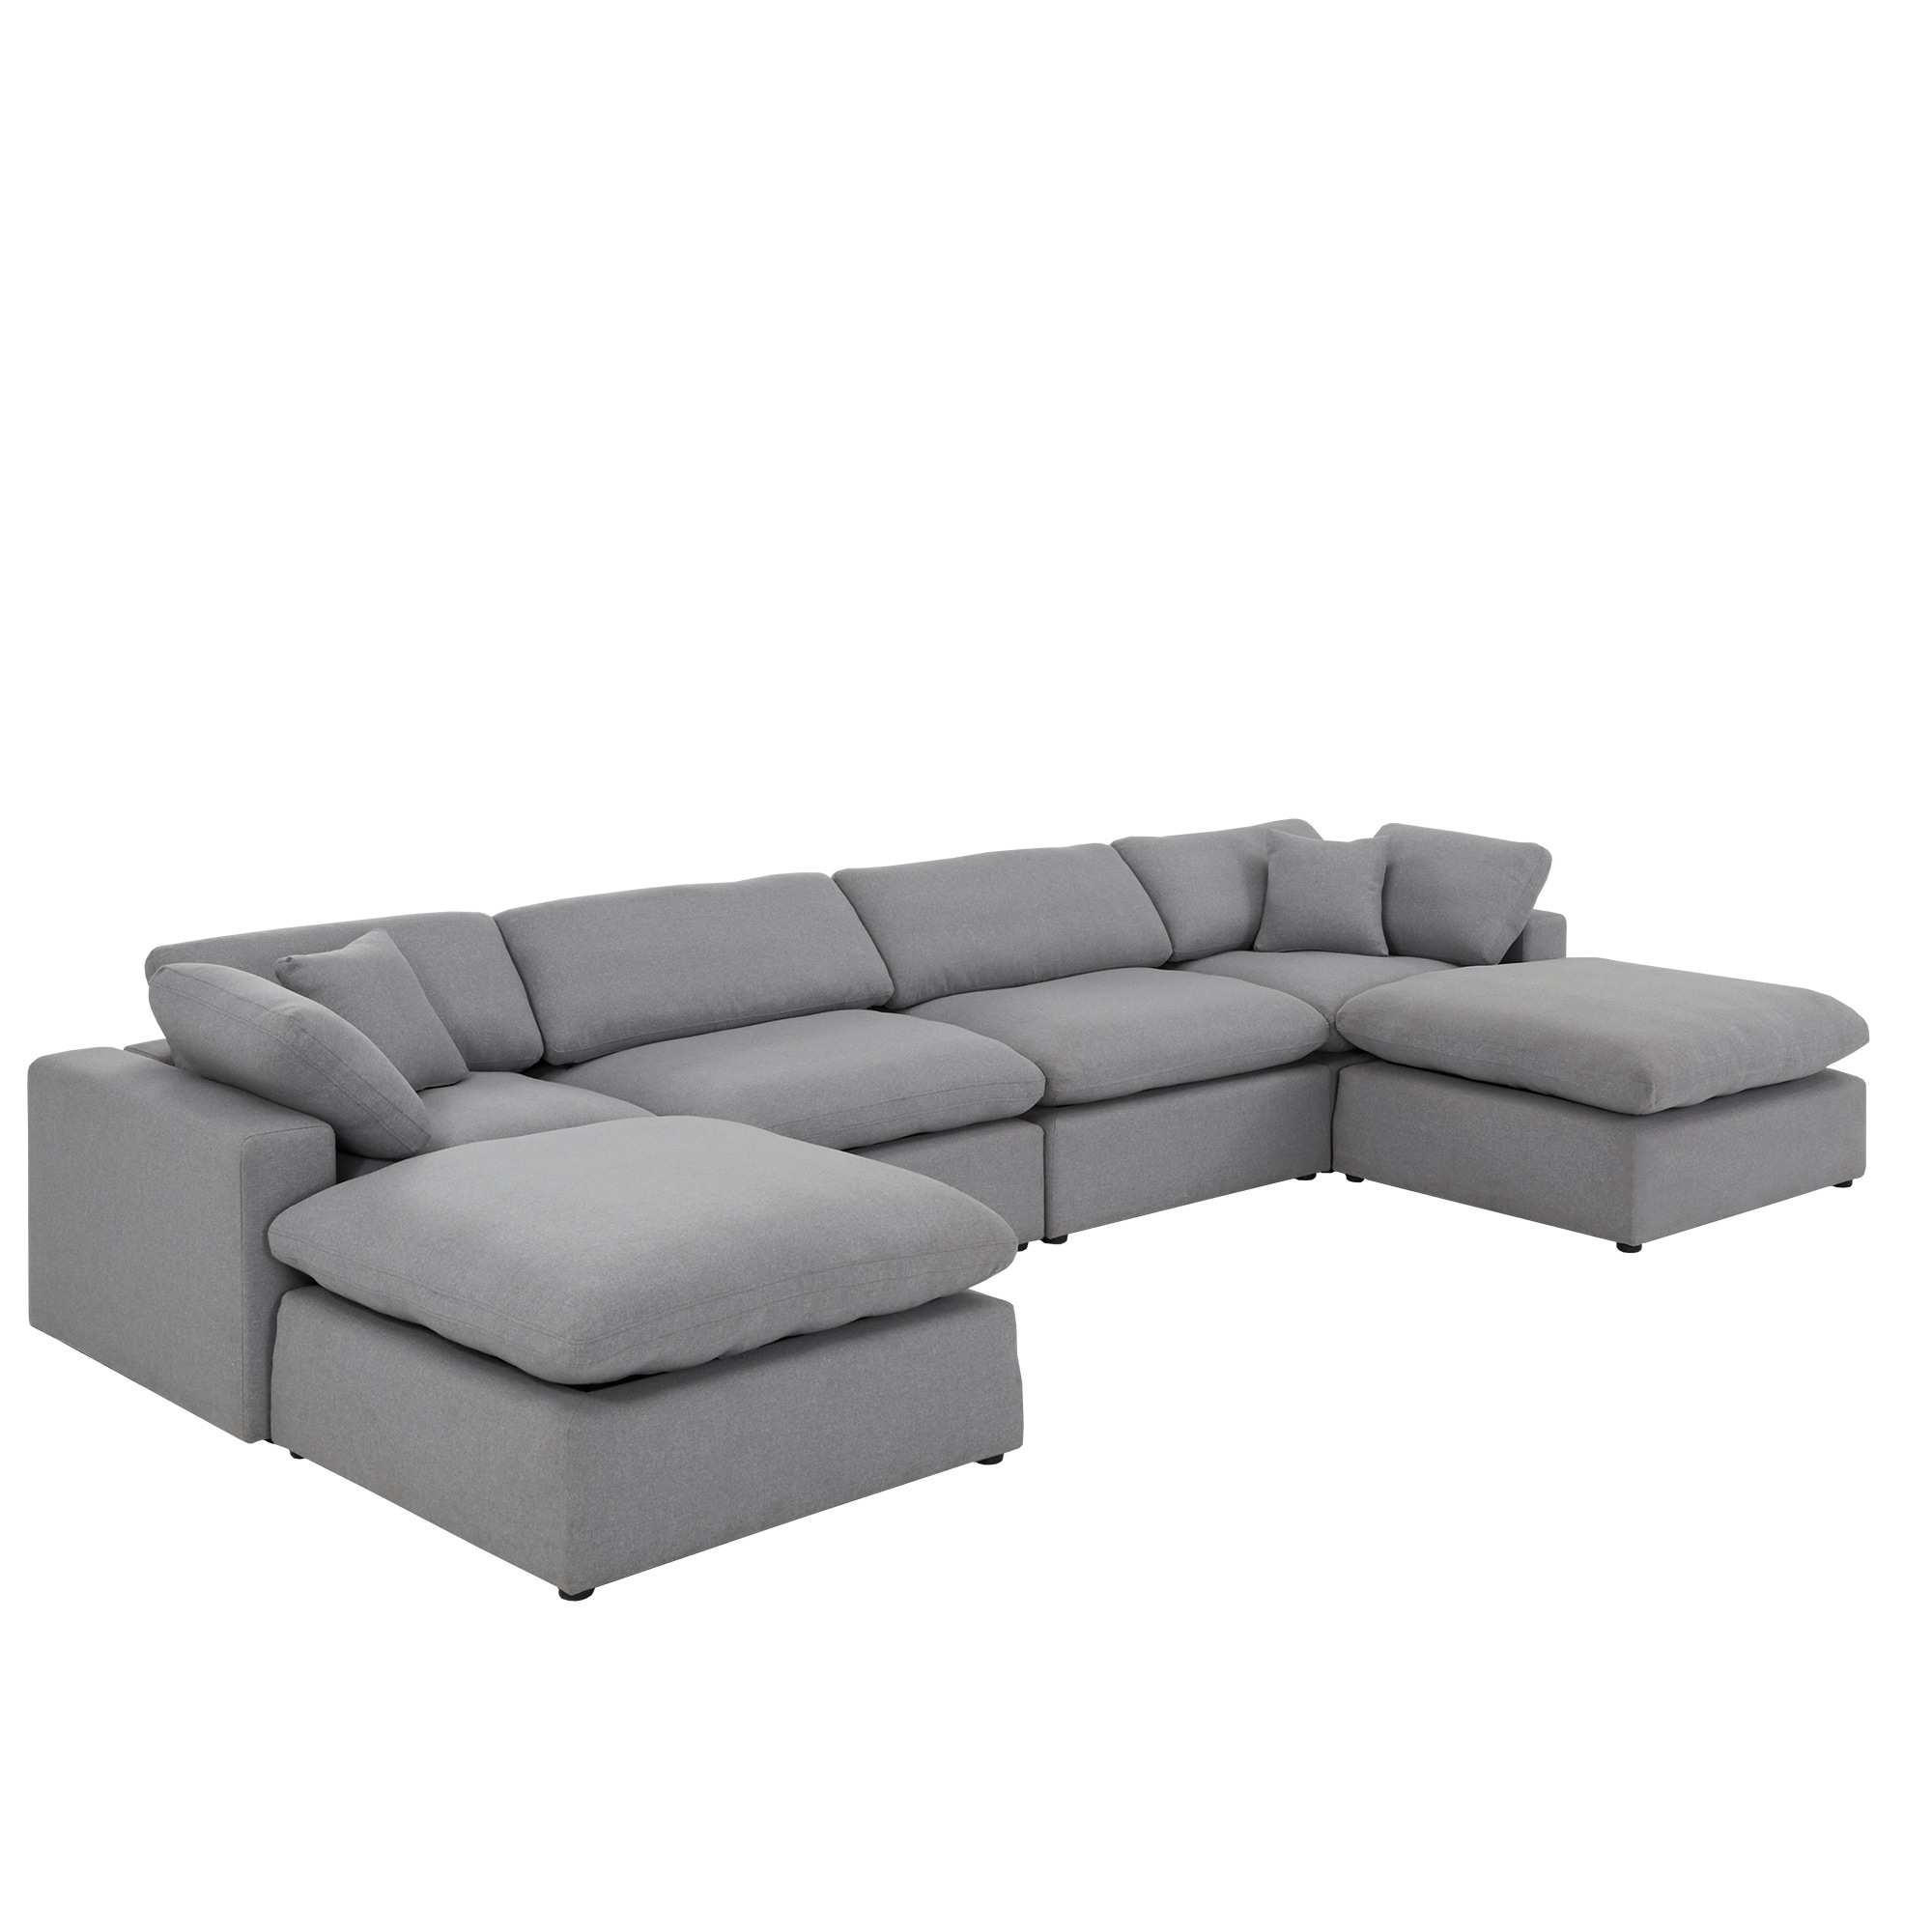 iNSPIRE Q Anka Grey Linen Down Filled Cushioned U-Shaped Sectional Sofa with Two Ottomans by  Modern